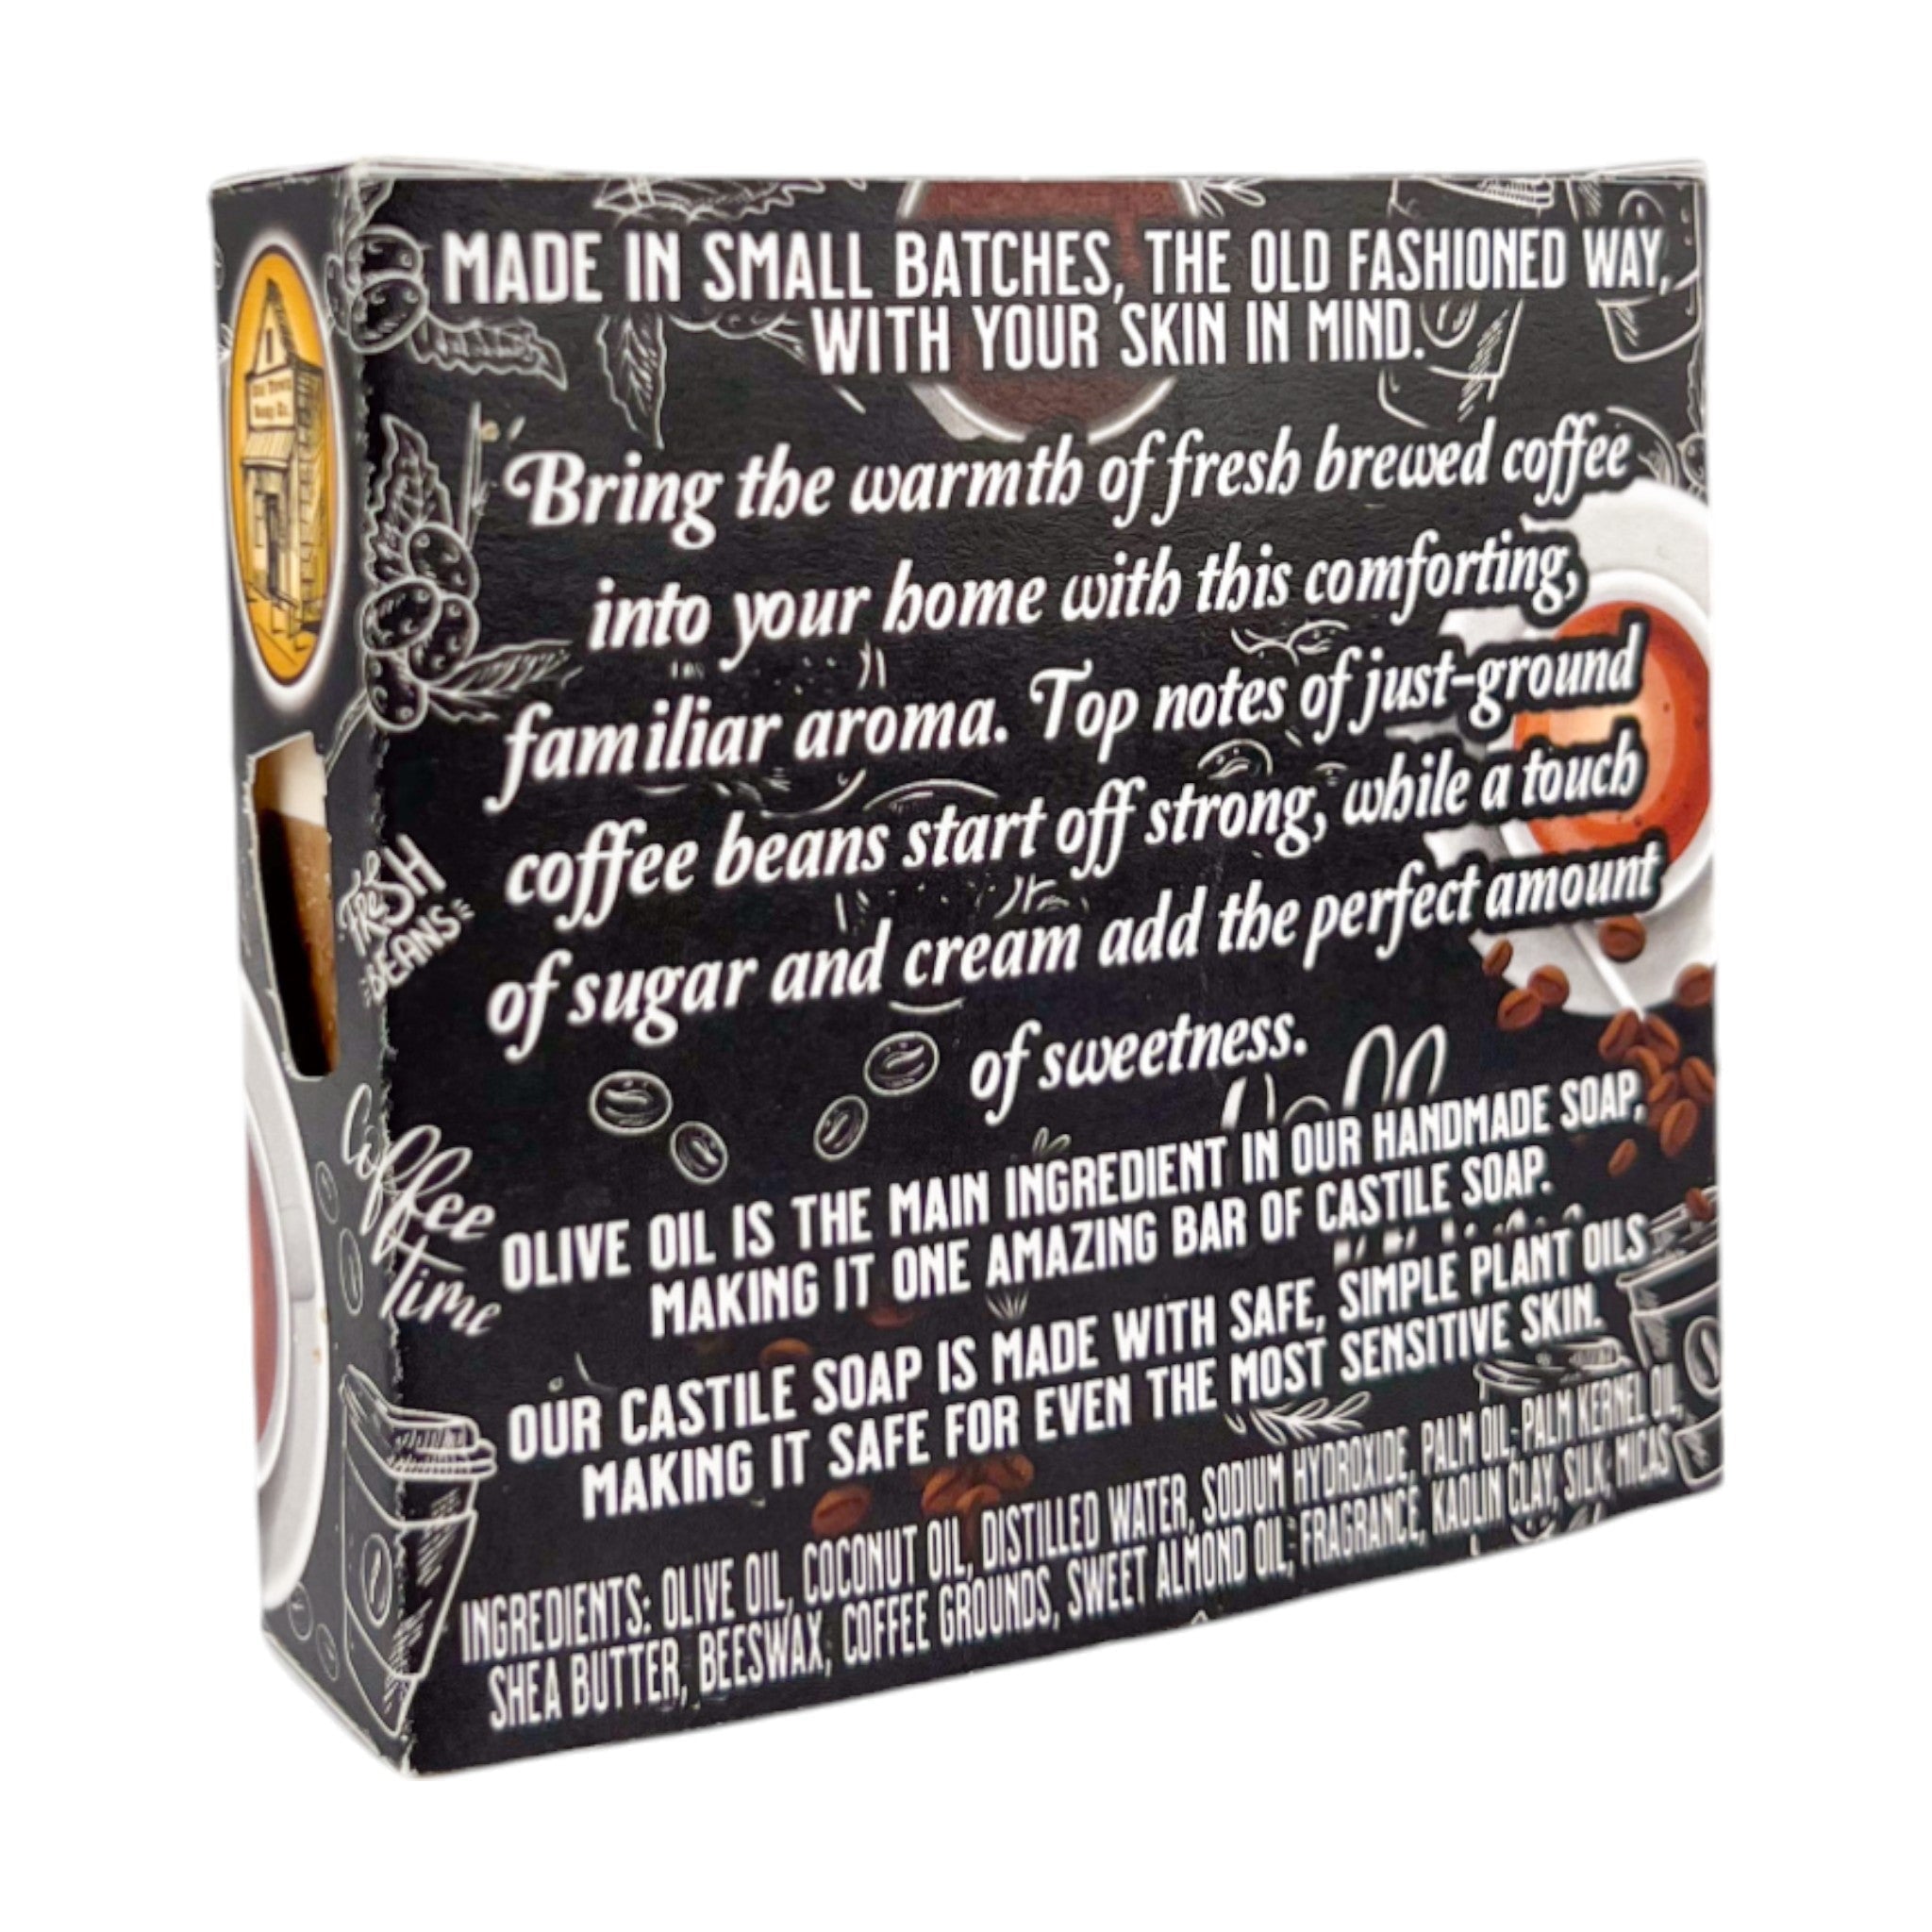 Fresh Coffee with Exfoliating Coffee Grounds Bar Soap - Old Town Soap Co.